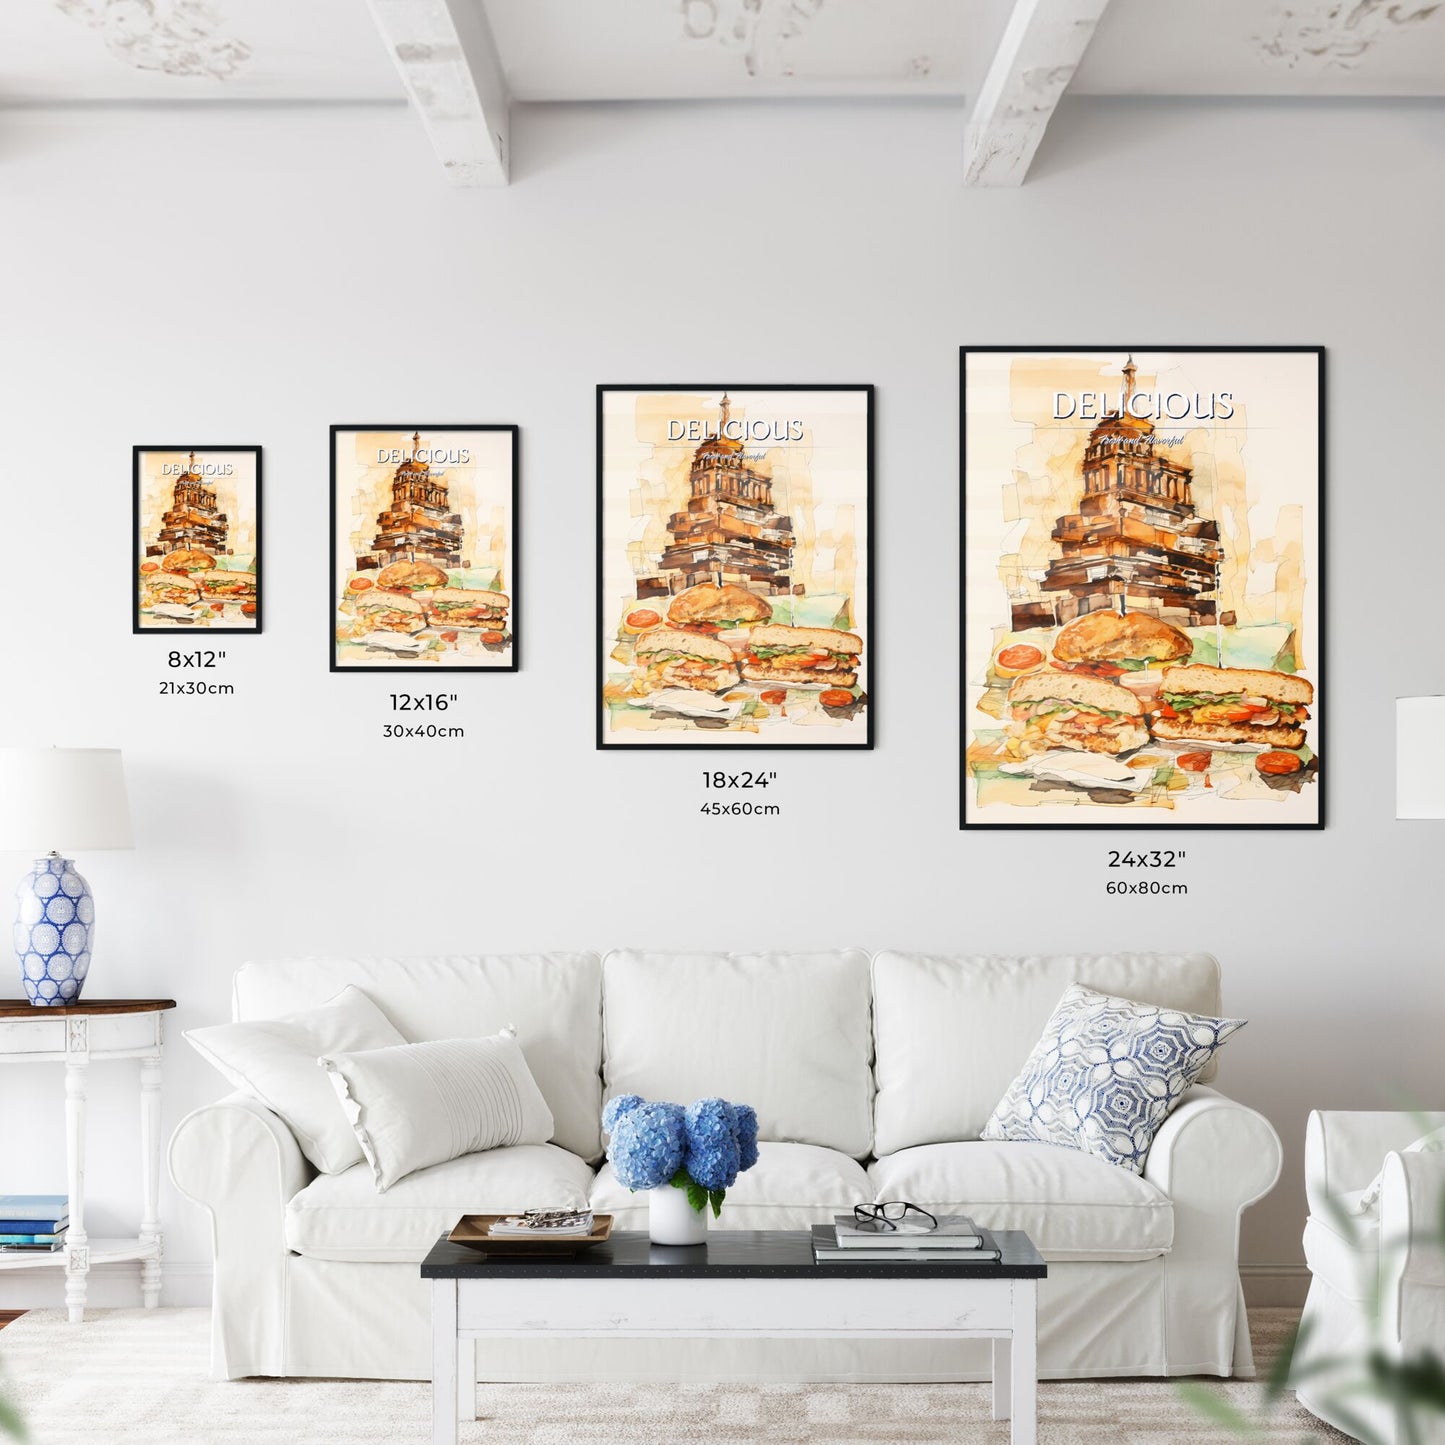 A Poster of illustration of a sandwich - A Watercolor Of A Sandwich And A Building Default Title